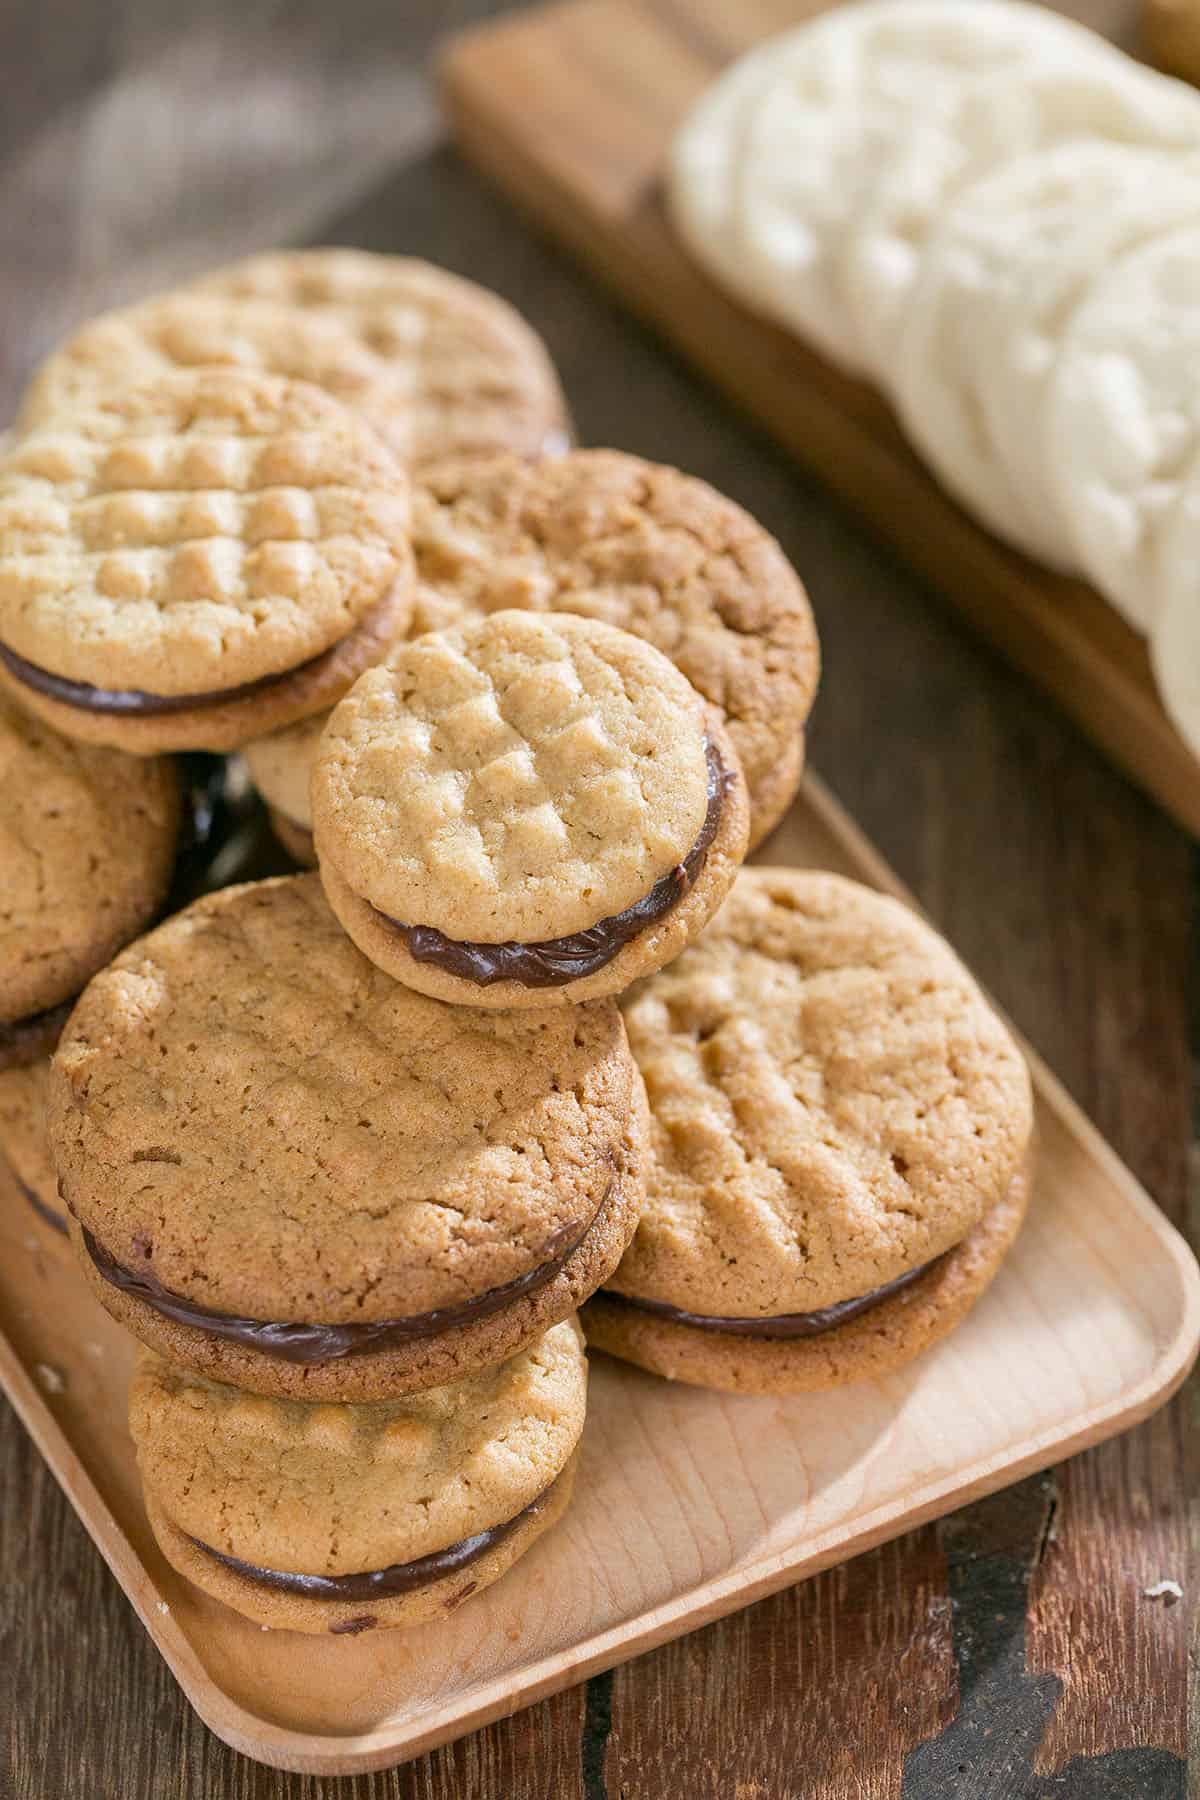 peanut butter cookies filled with chocolate